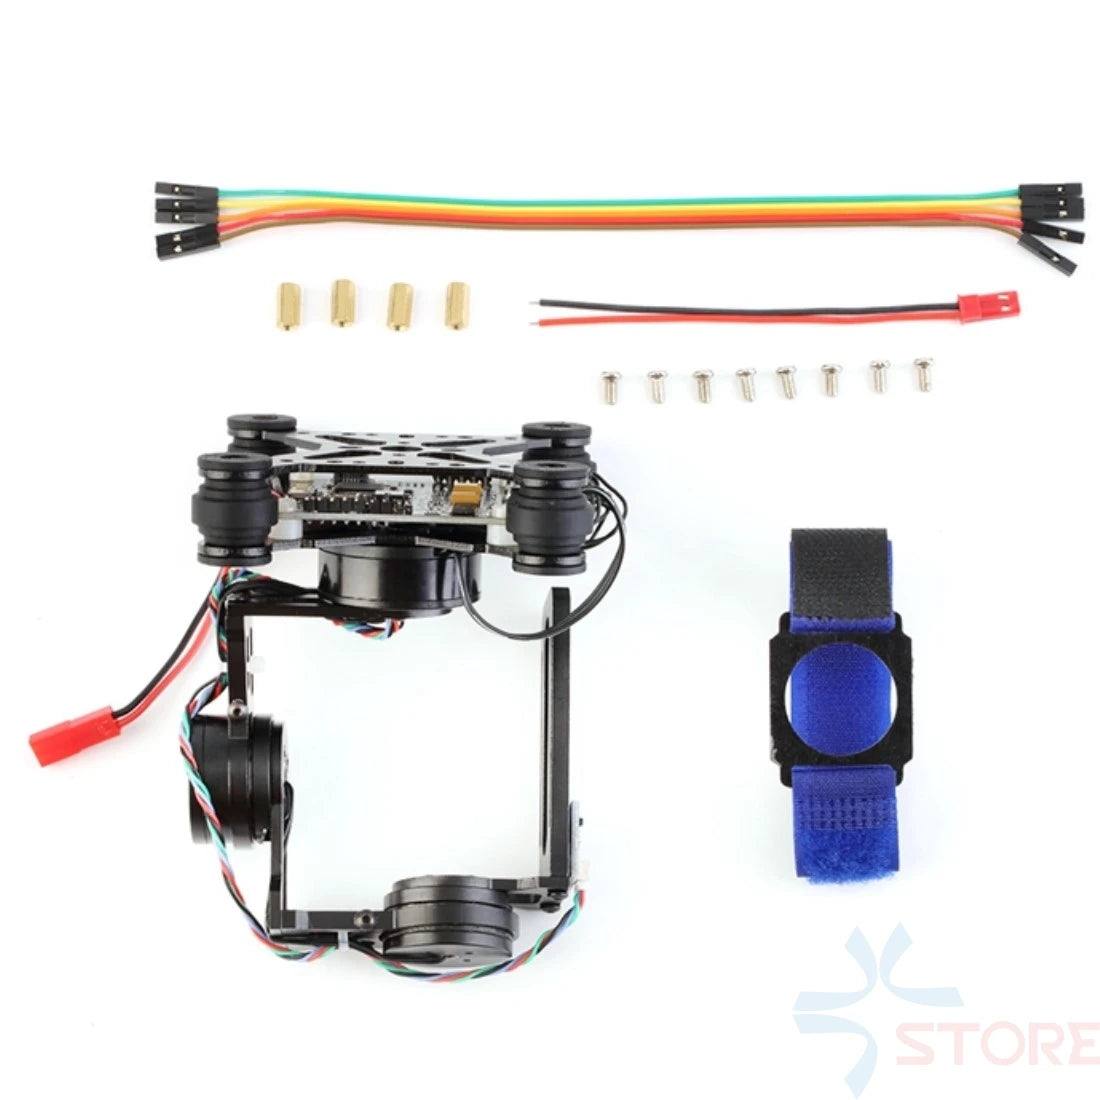 3 Axis Brushless Gimbal, there are black and blue color for the battery belt, send the color at random.